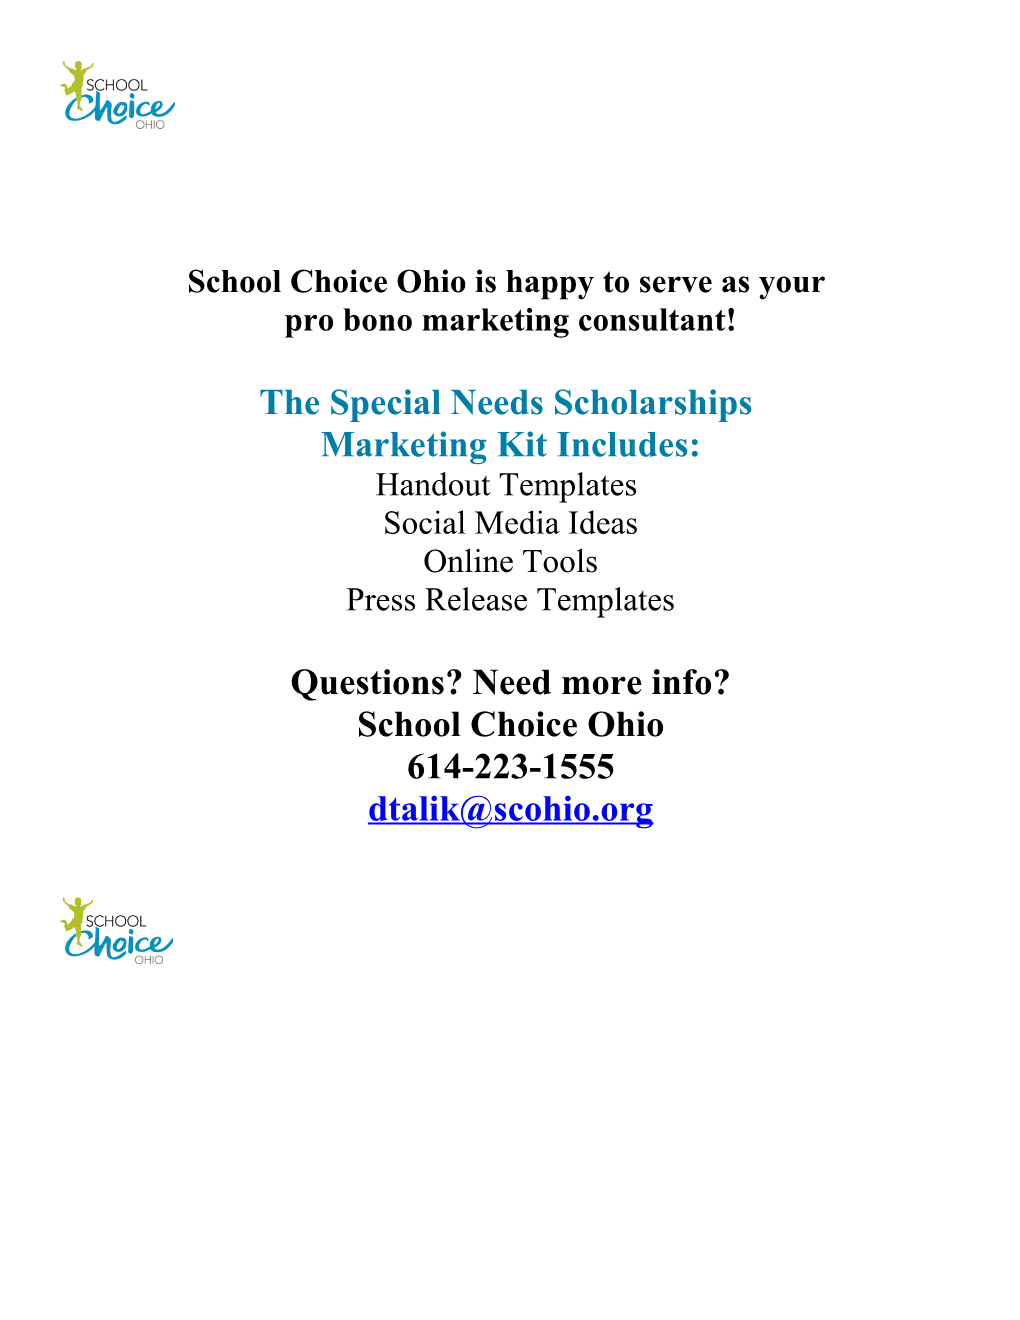 The Special Needs Scholarships Marketing Kit Includes